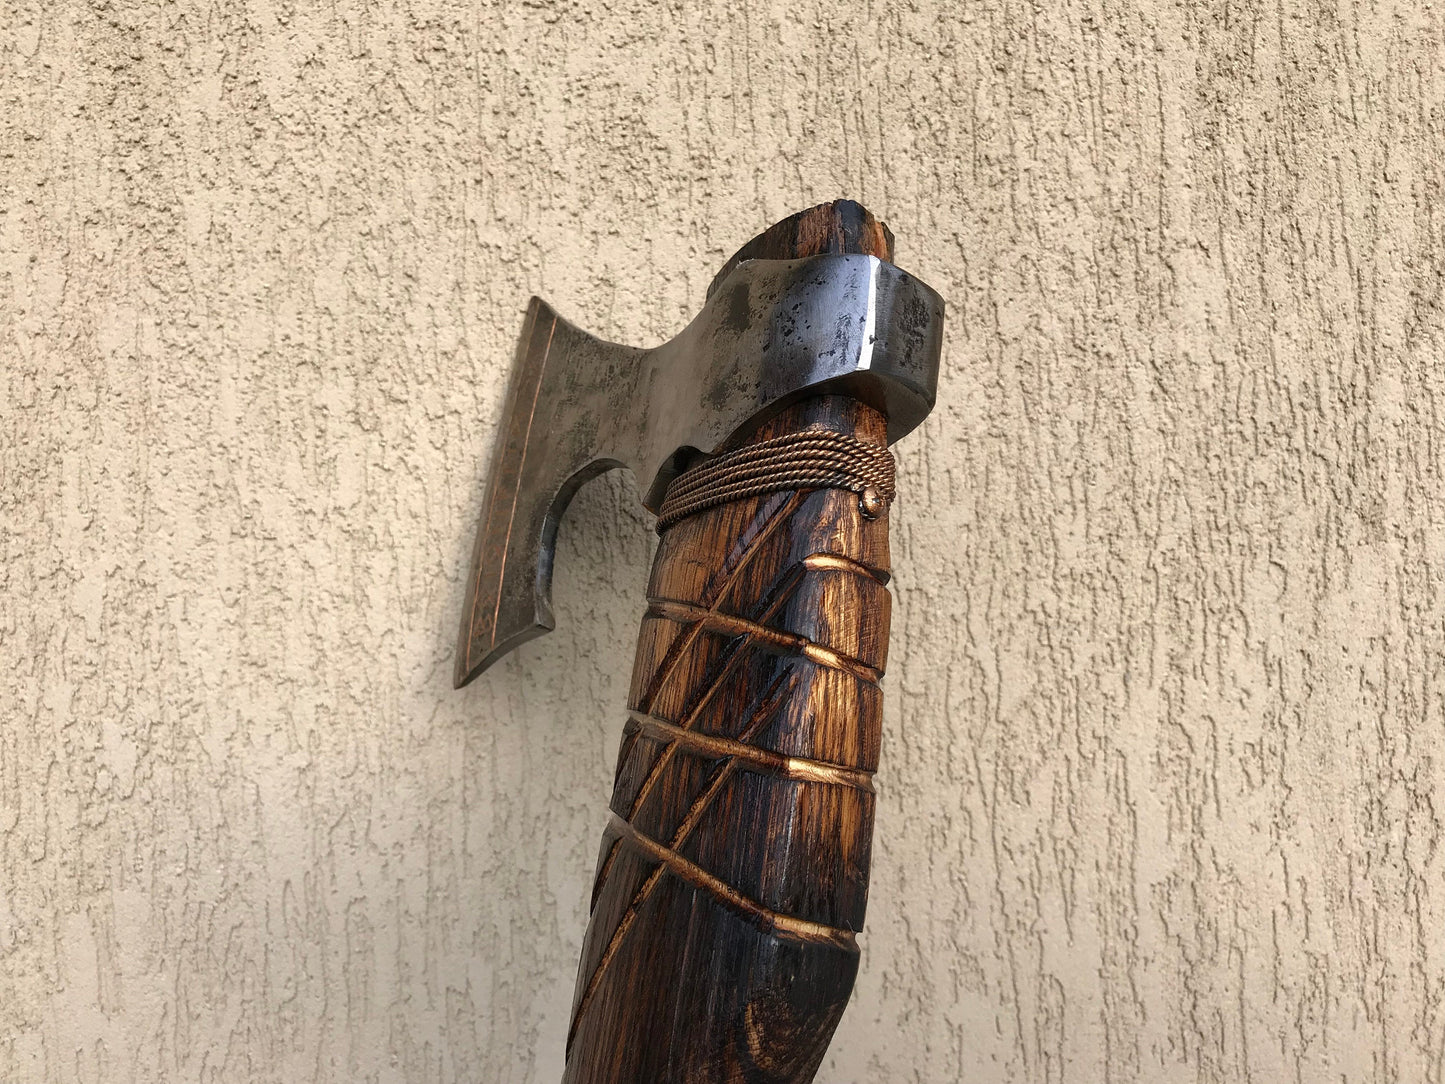 Viking axe, axe, medieval axe, hatchet, mens gifts, vikings, viking weapons, viking camp, viking armor, cosplay weapon, cosplay armor, knife